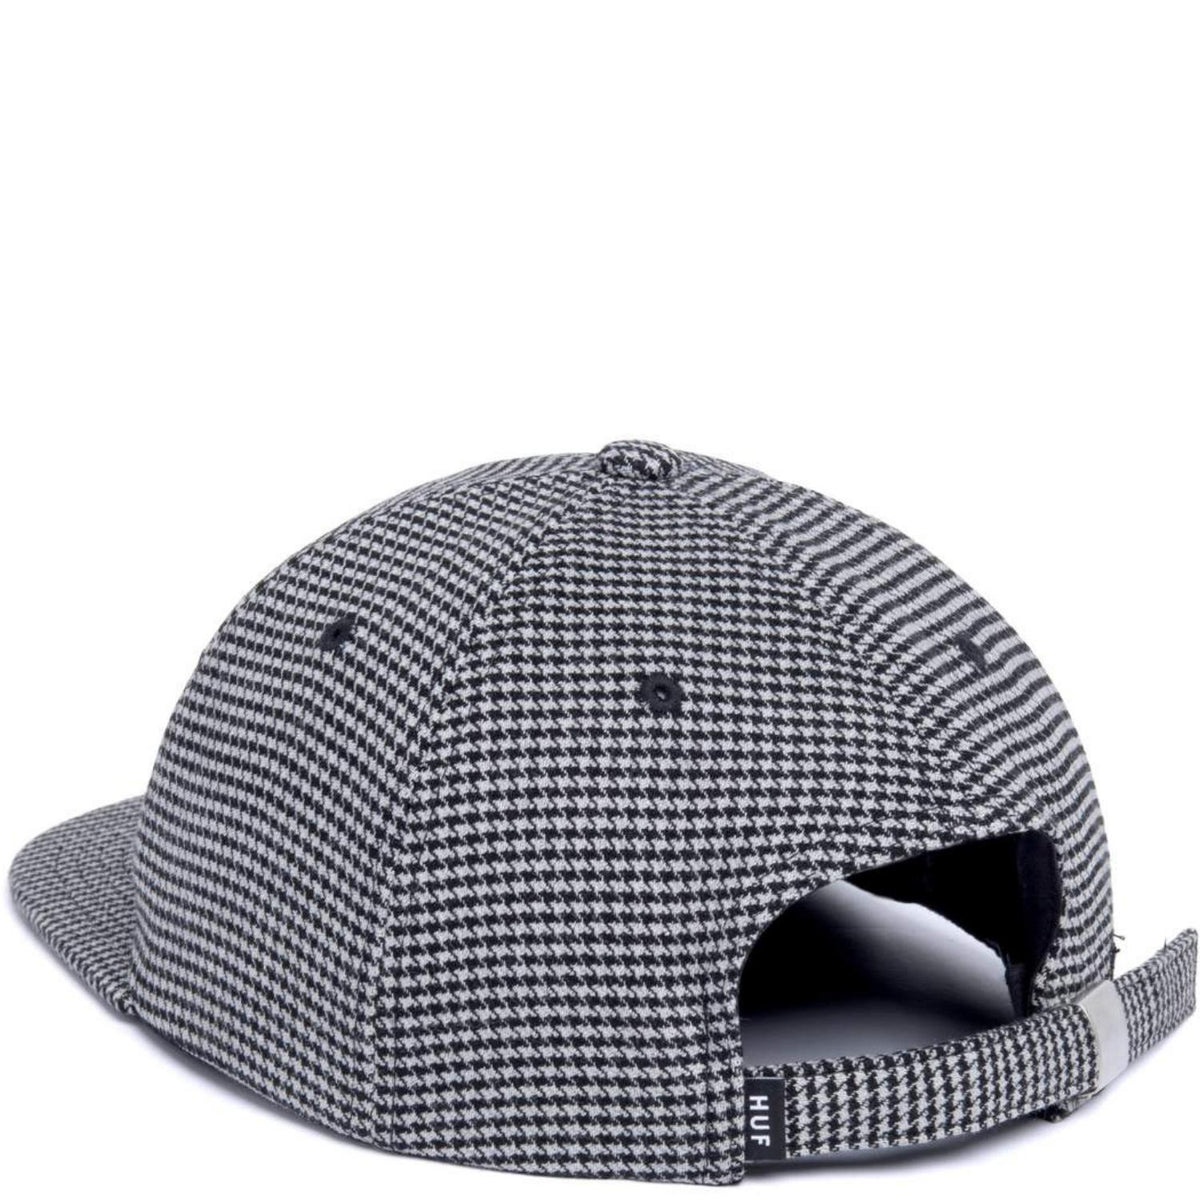 Huf Classic H Houndstooth Strapback Cap - Black - Strapback Cap by Huf One Size